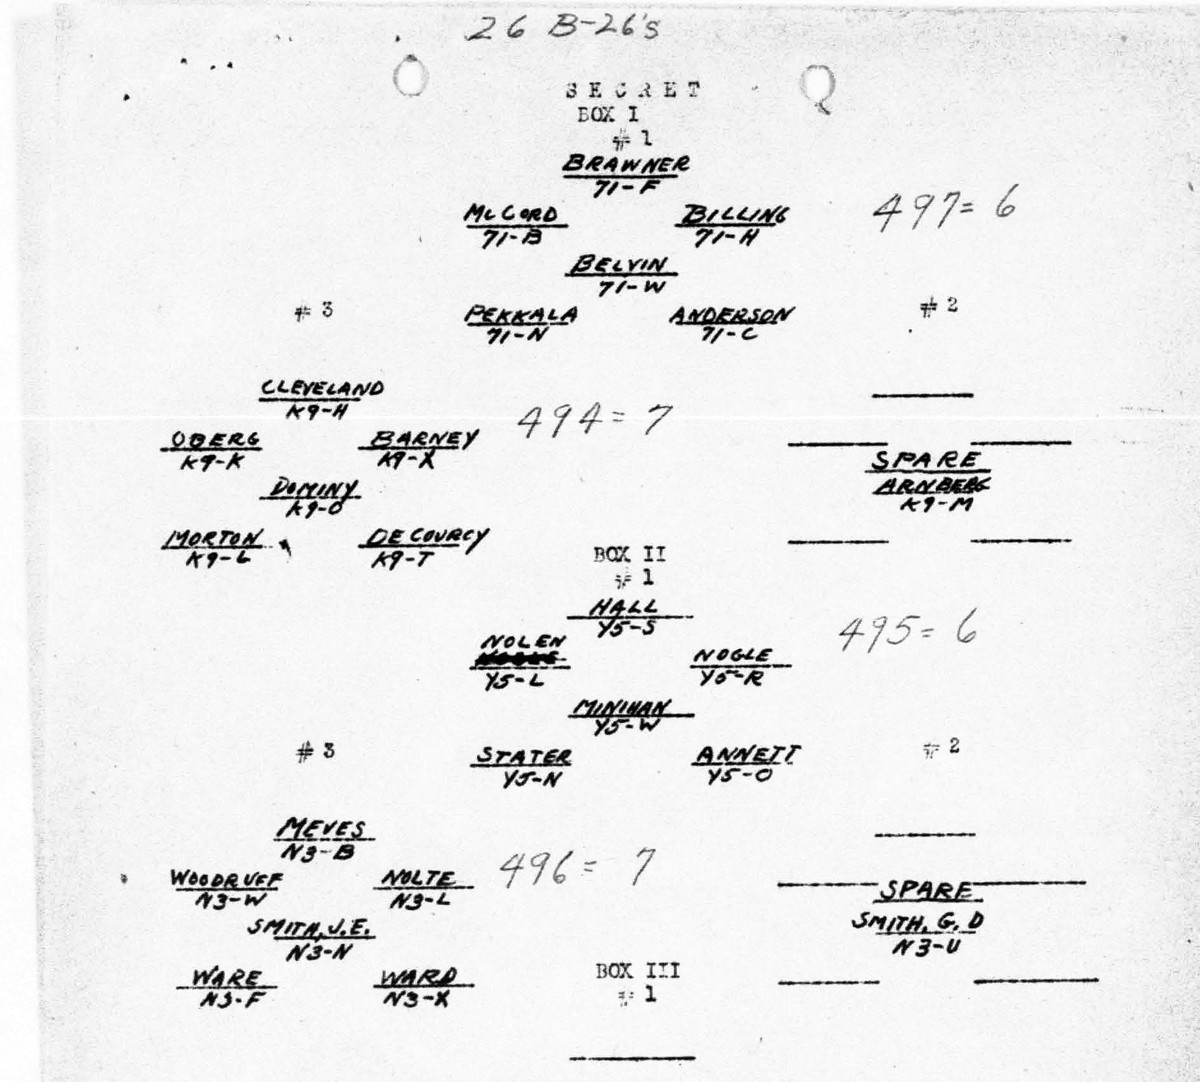 Charles Ware Formation 3-24-45 mission 3 B0299 p1000